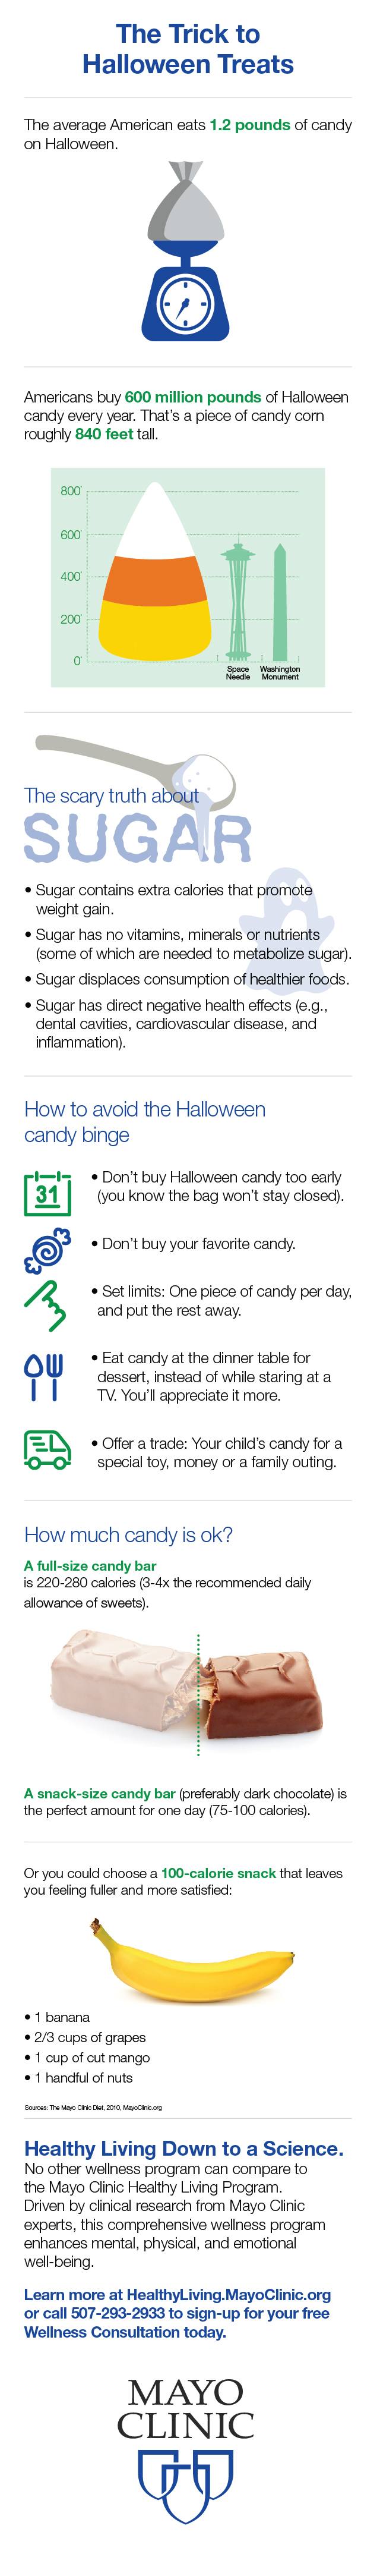 Halloween candy infographic